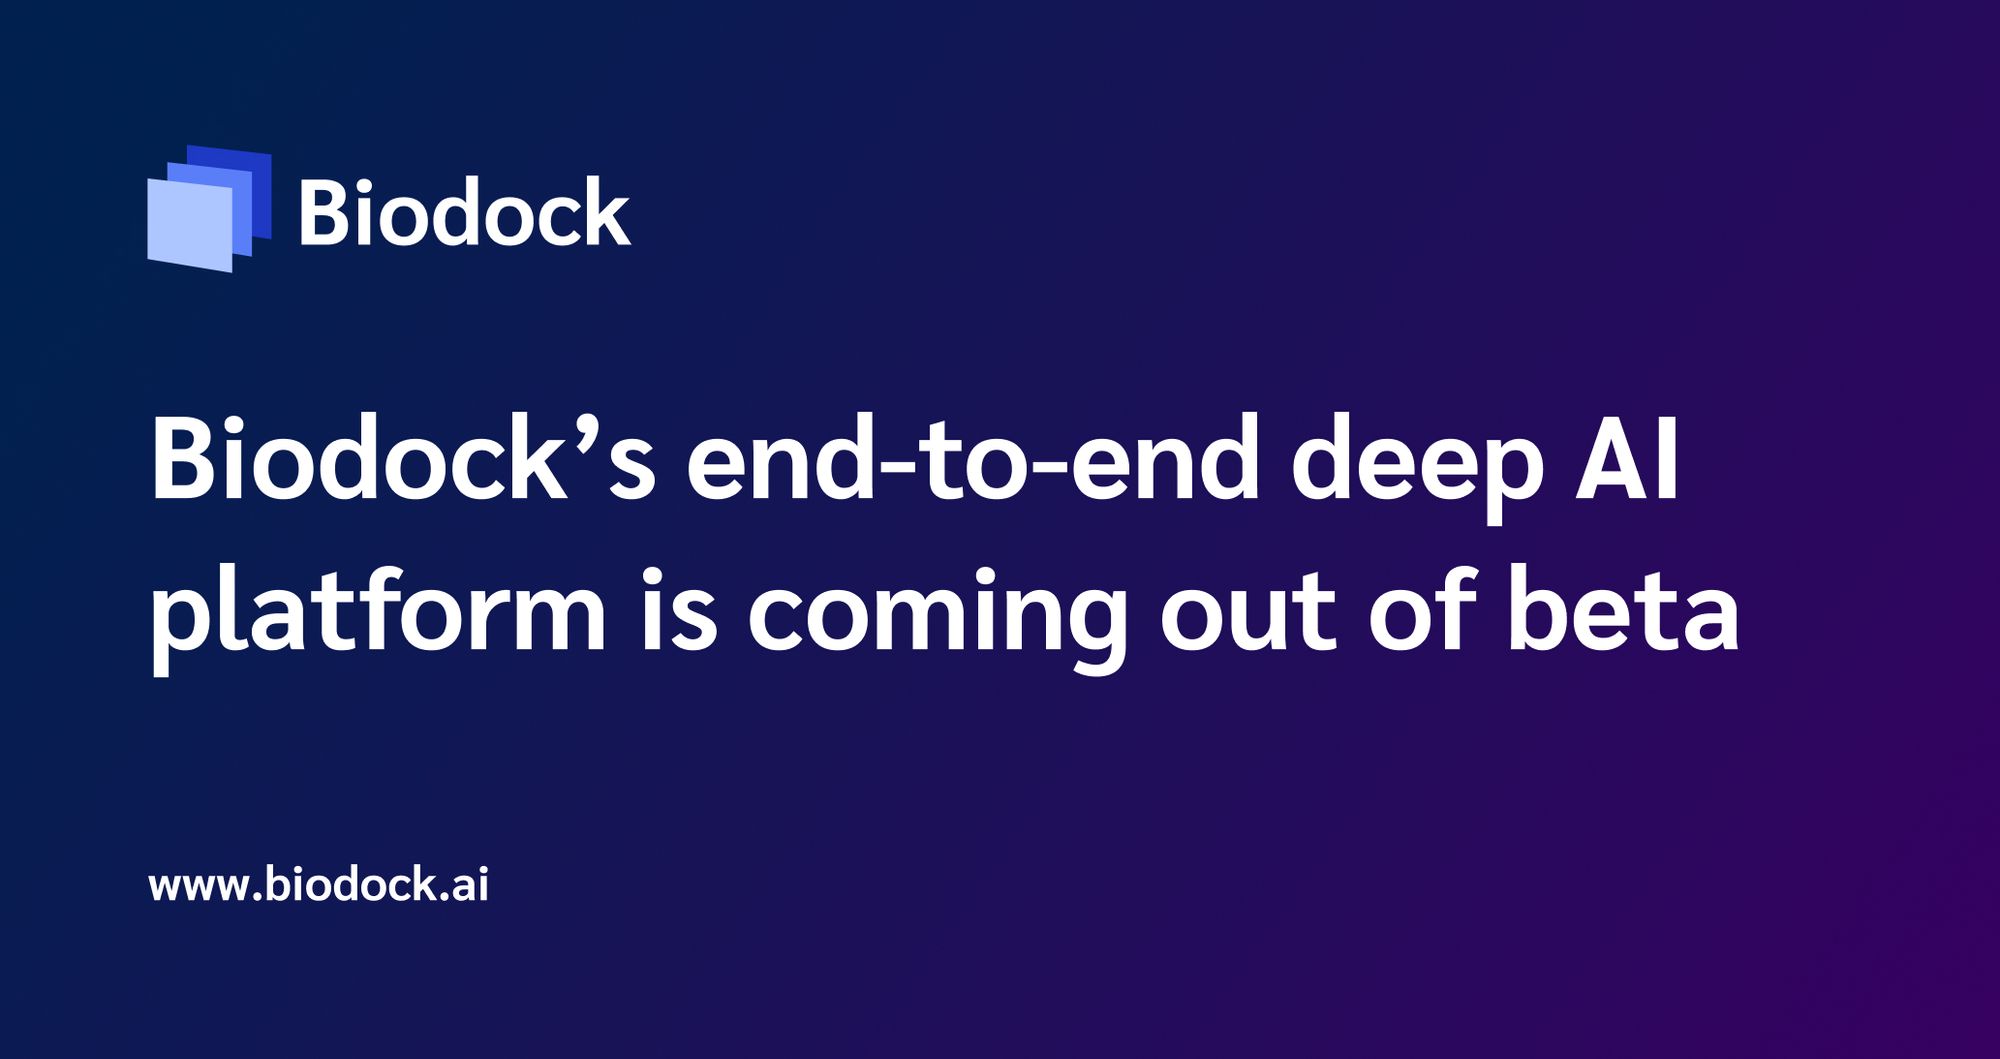 Biodock's end-to-end deep AI platform is coming out of beta